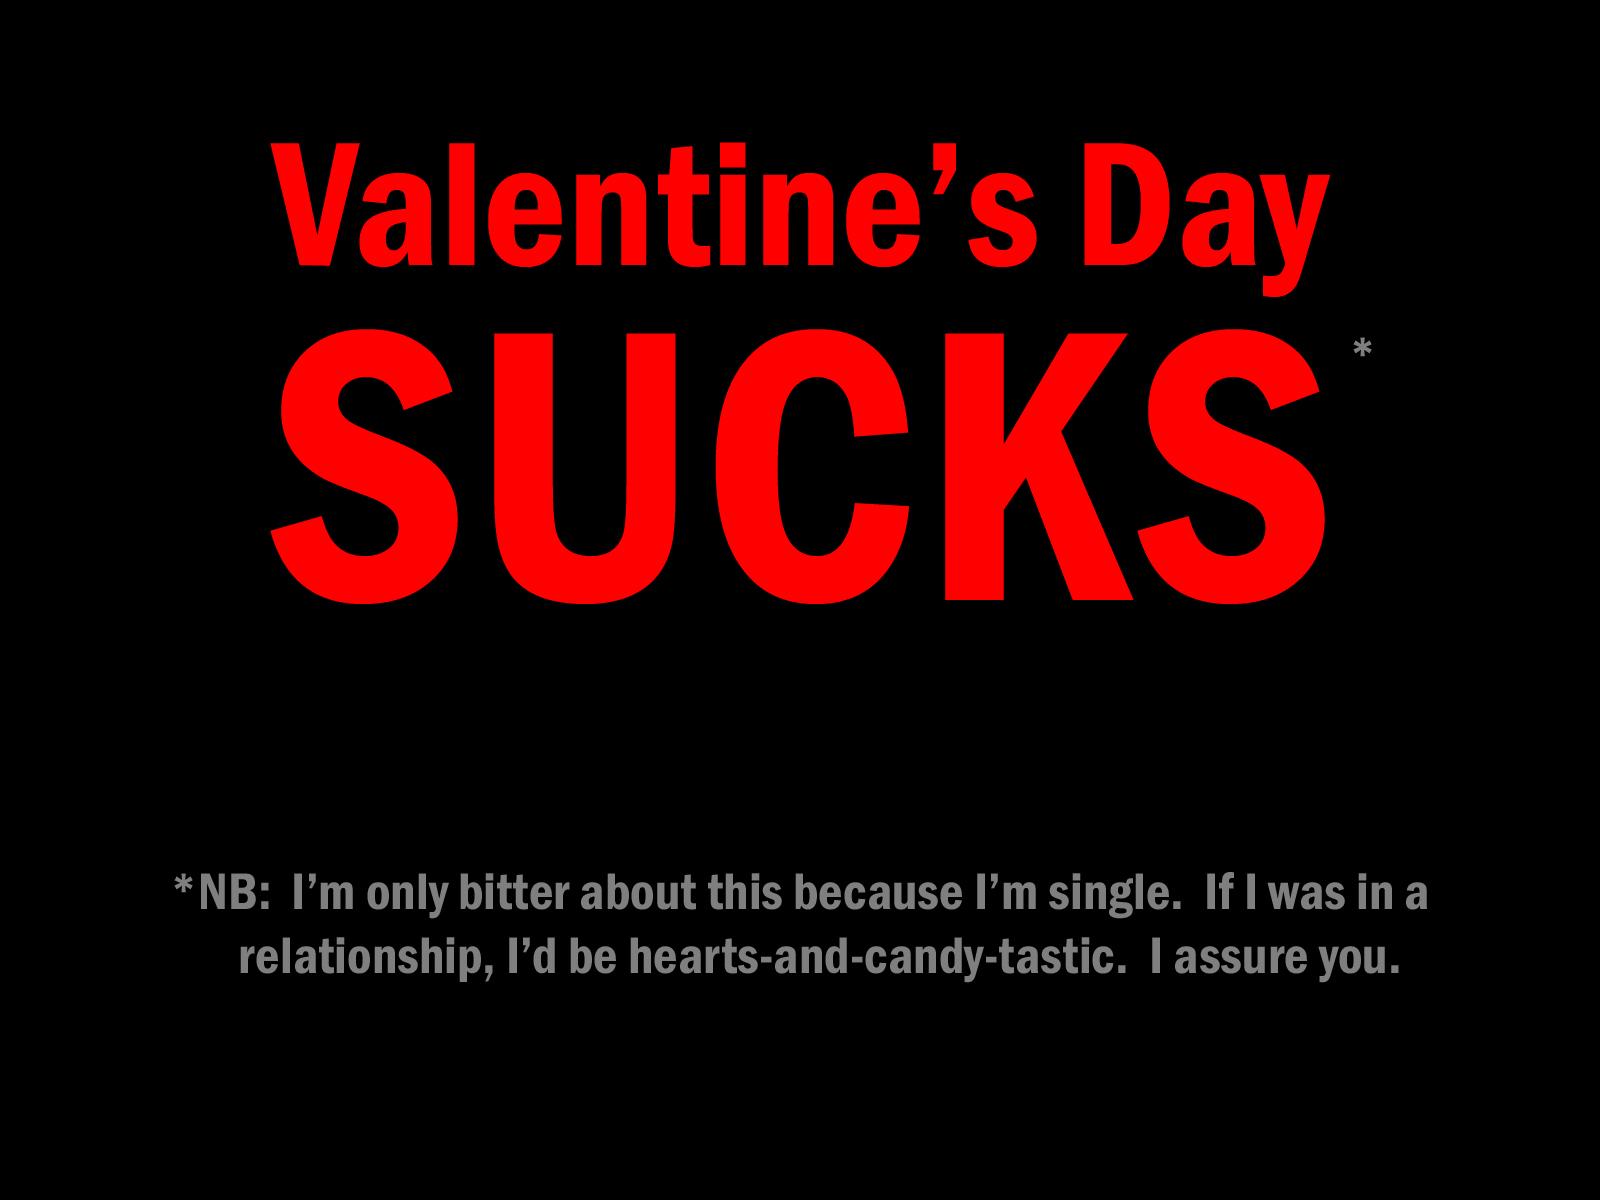 Valentines Day Sayings